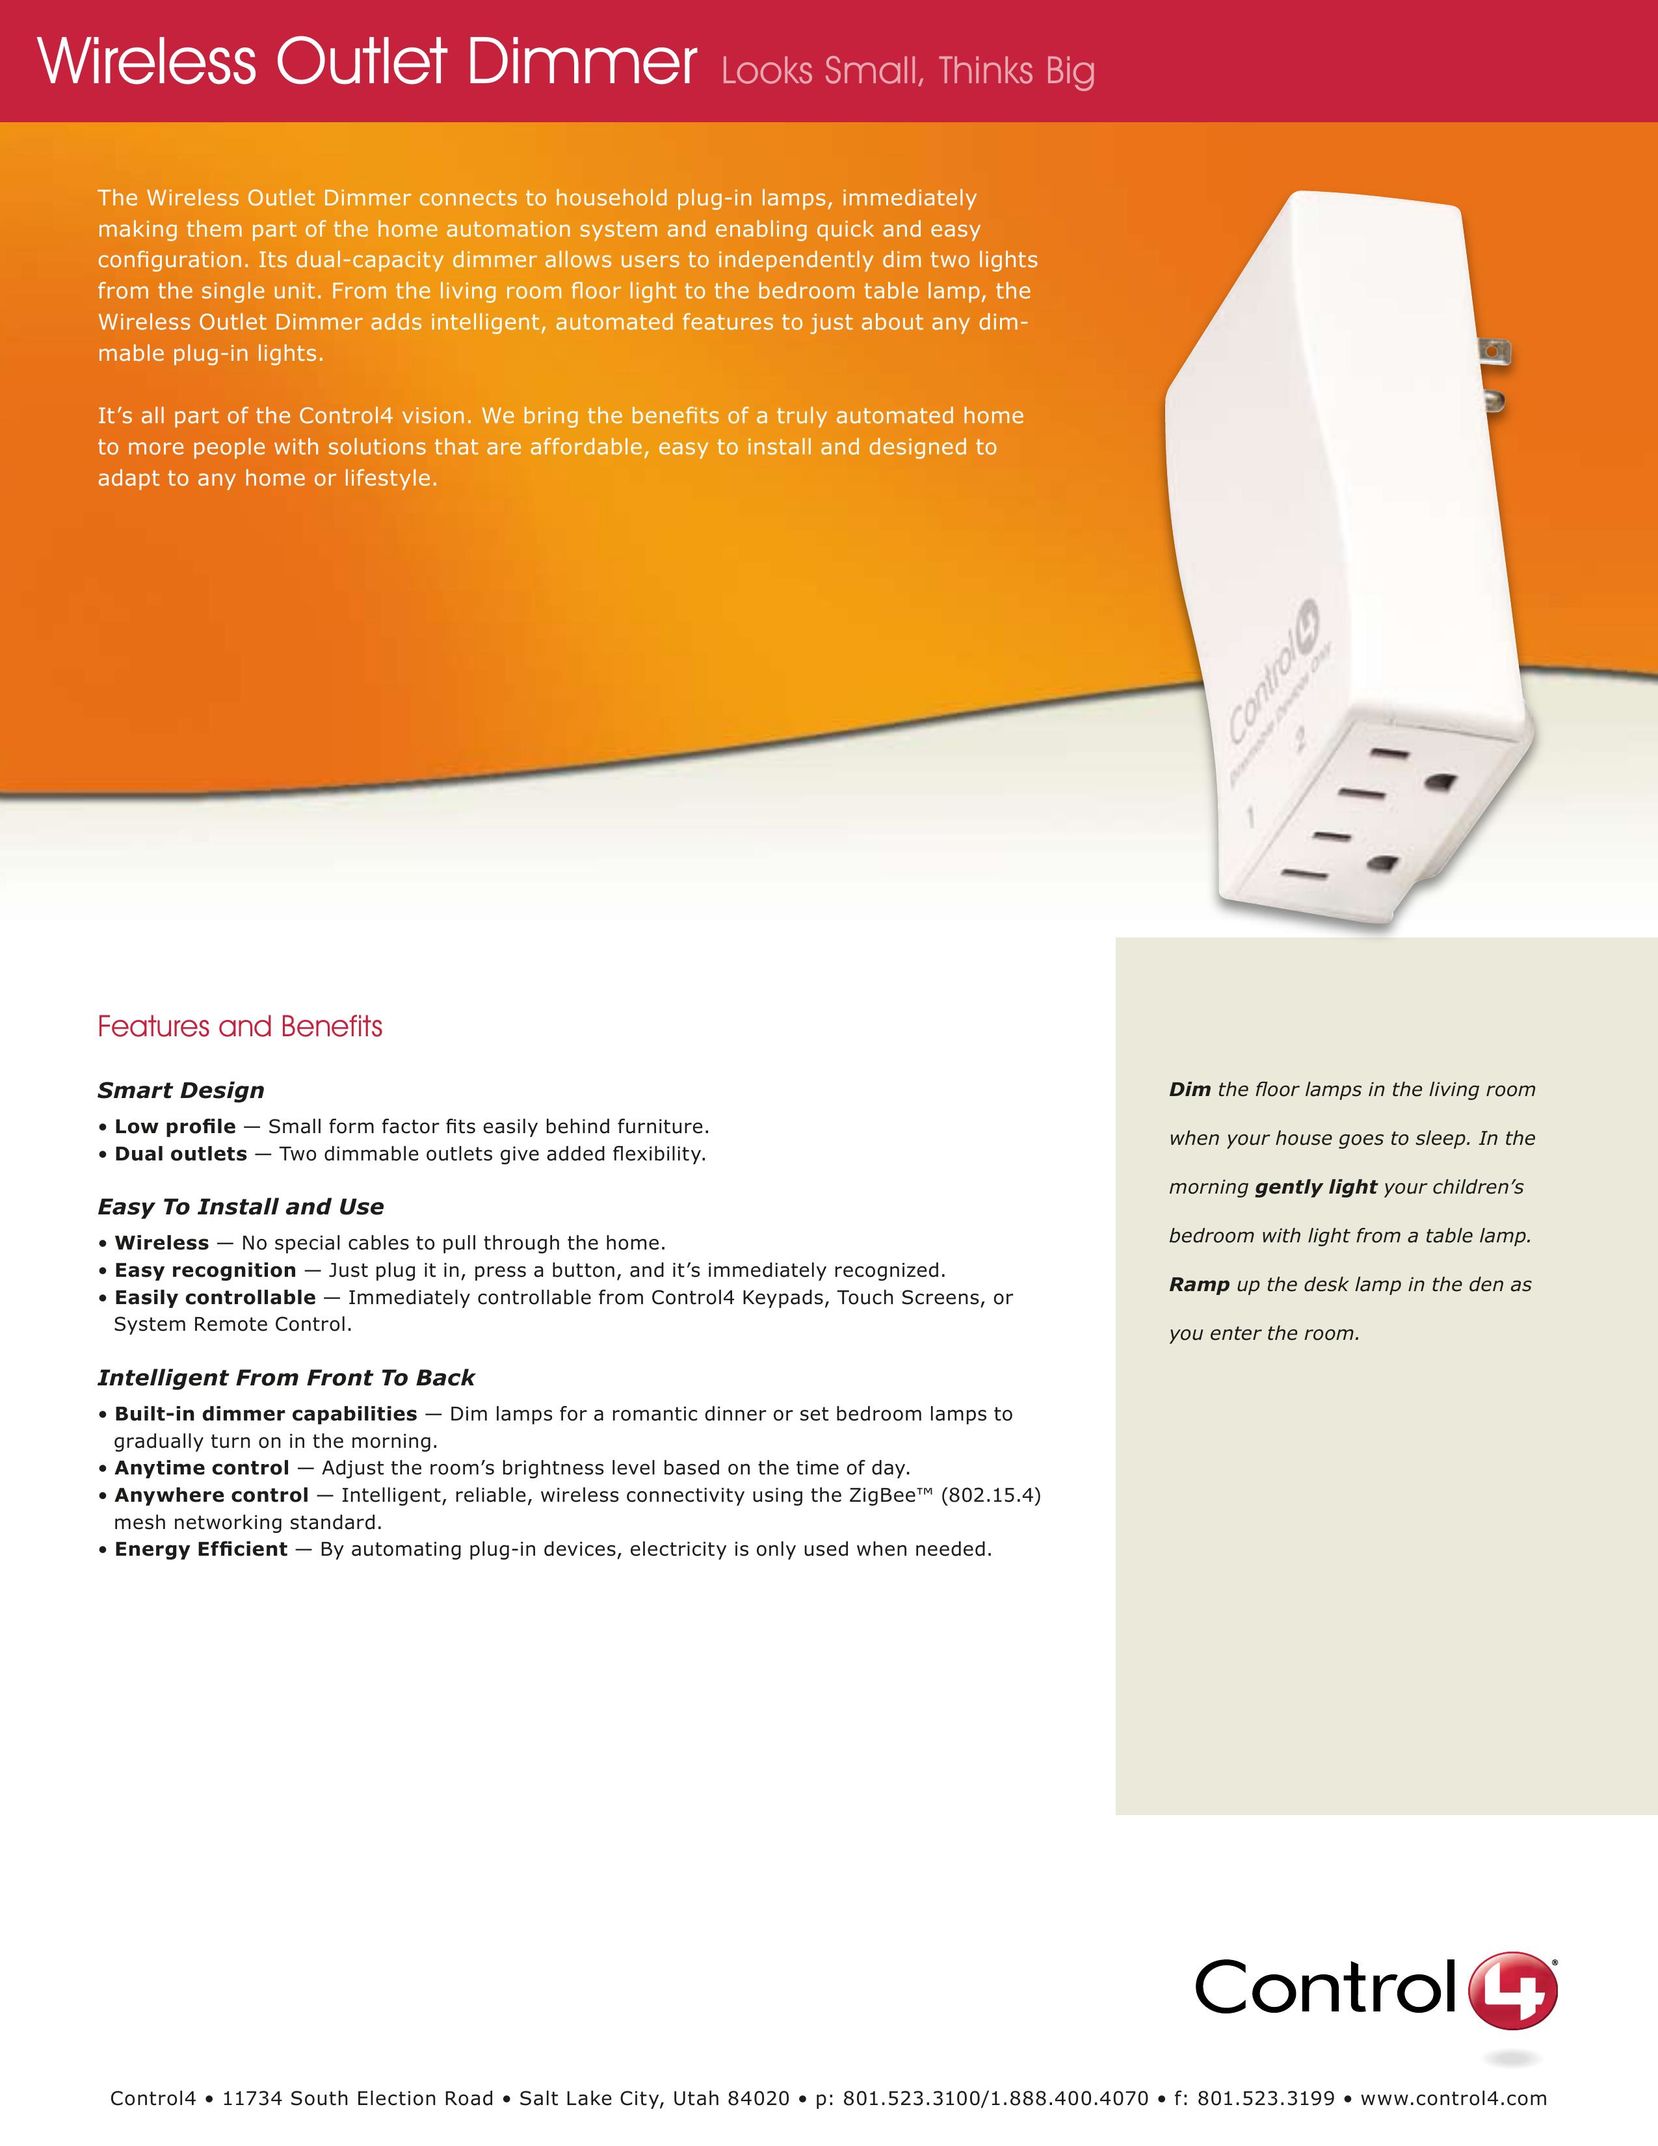 Control4 Wireless Outlet Dimmer Indoor Furnishings User Manual